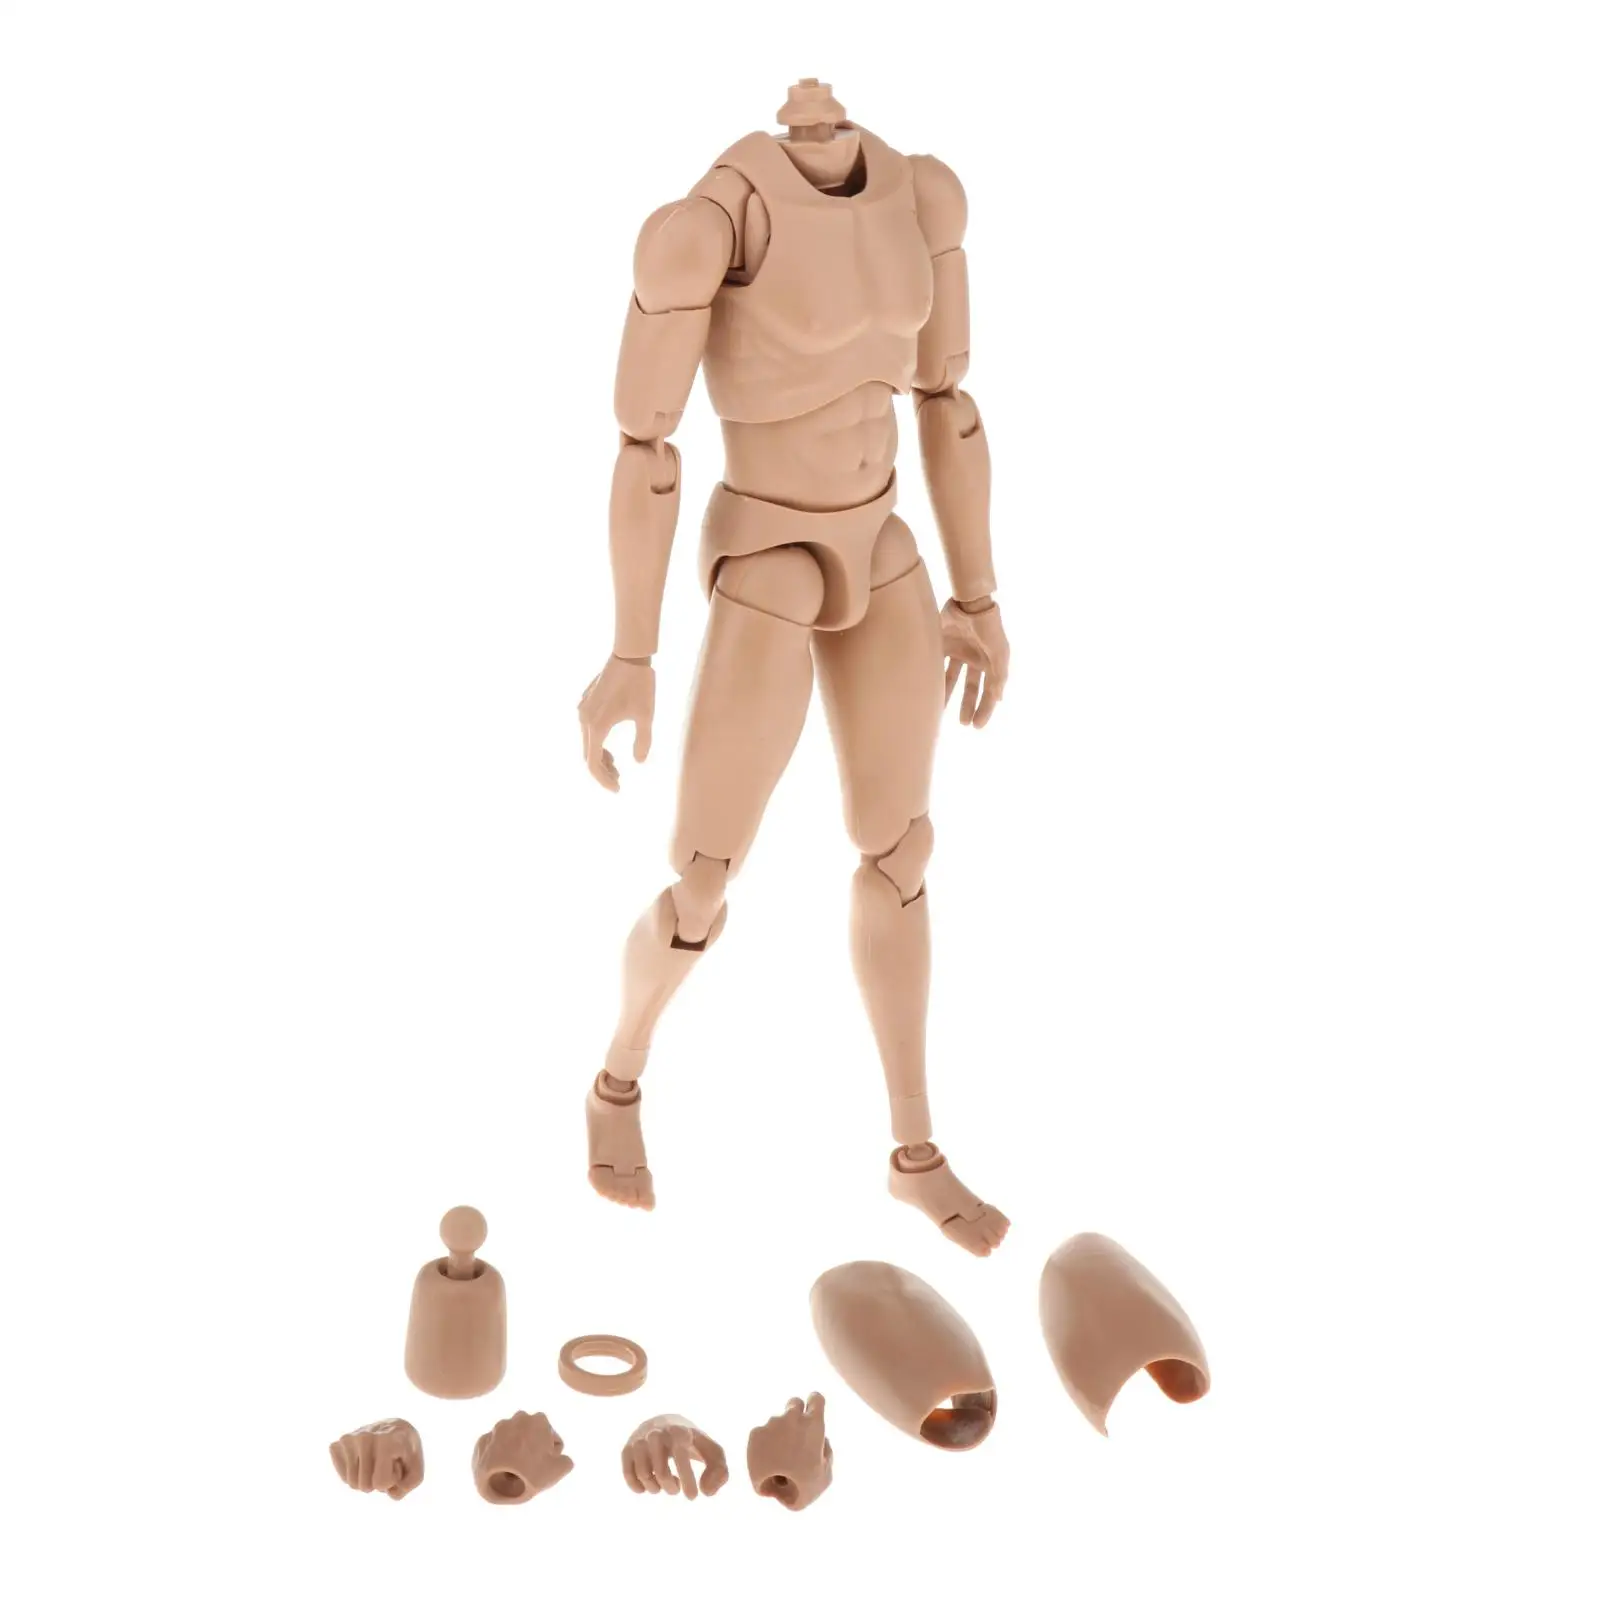 1/6 Male Muscular Body Figure Moveable Joint 12'' Action Man Skeleton for HT